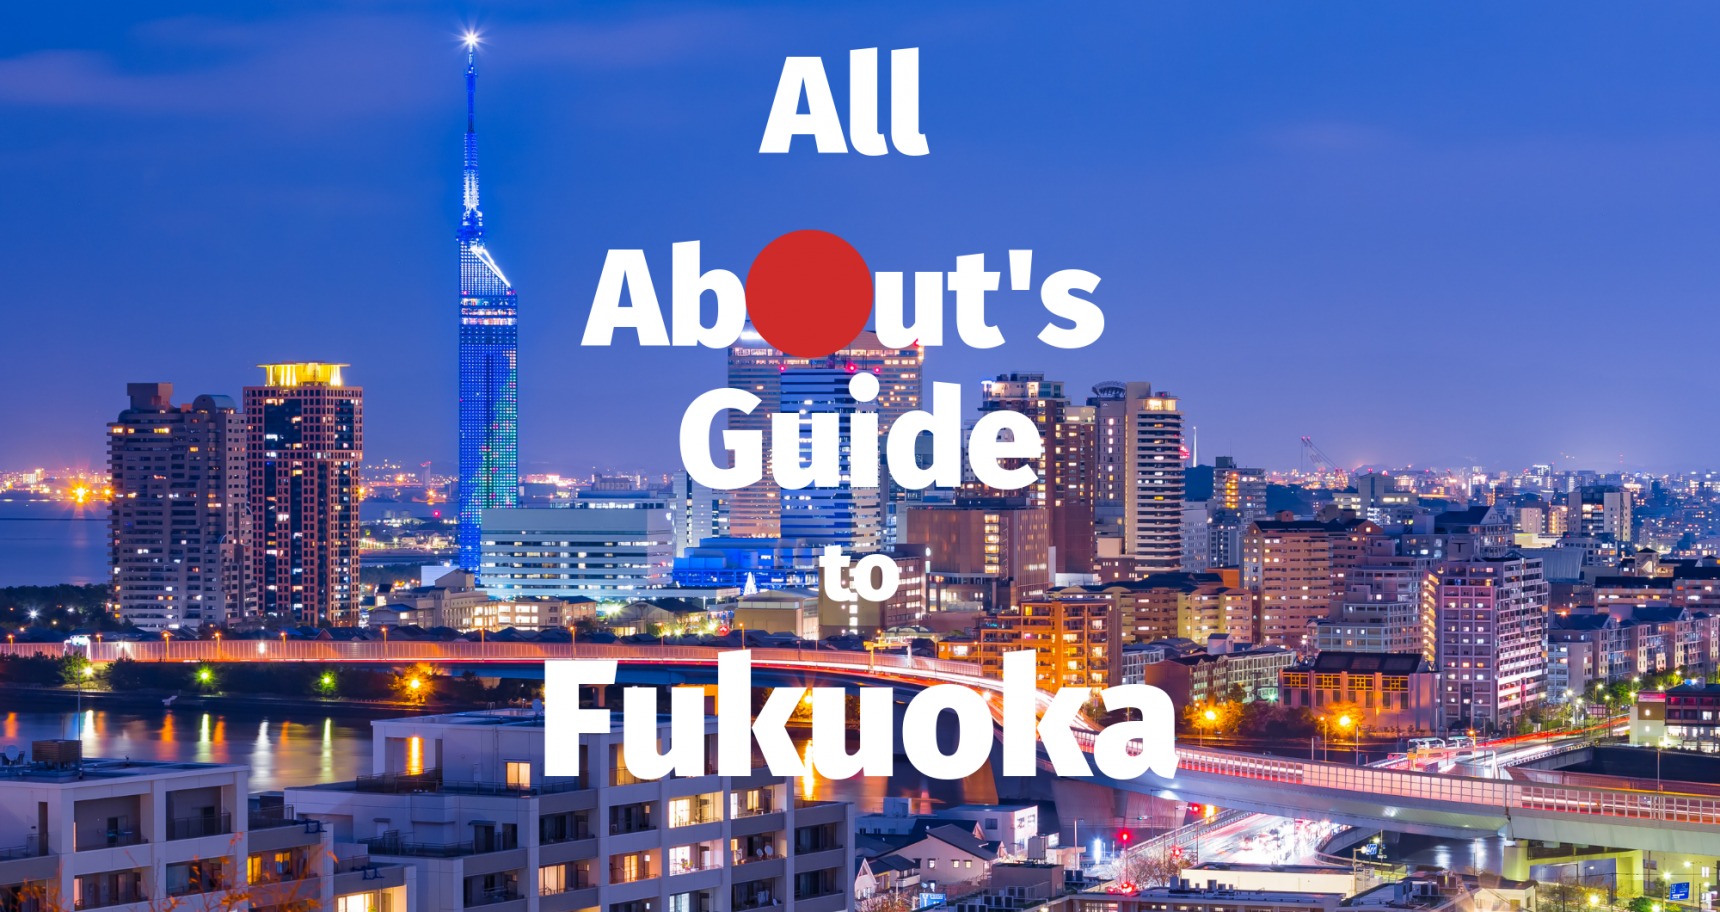 All About's Guide to Fukuoka